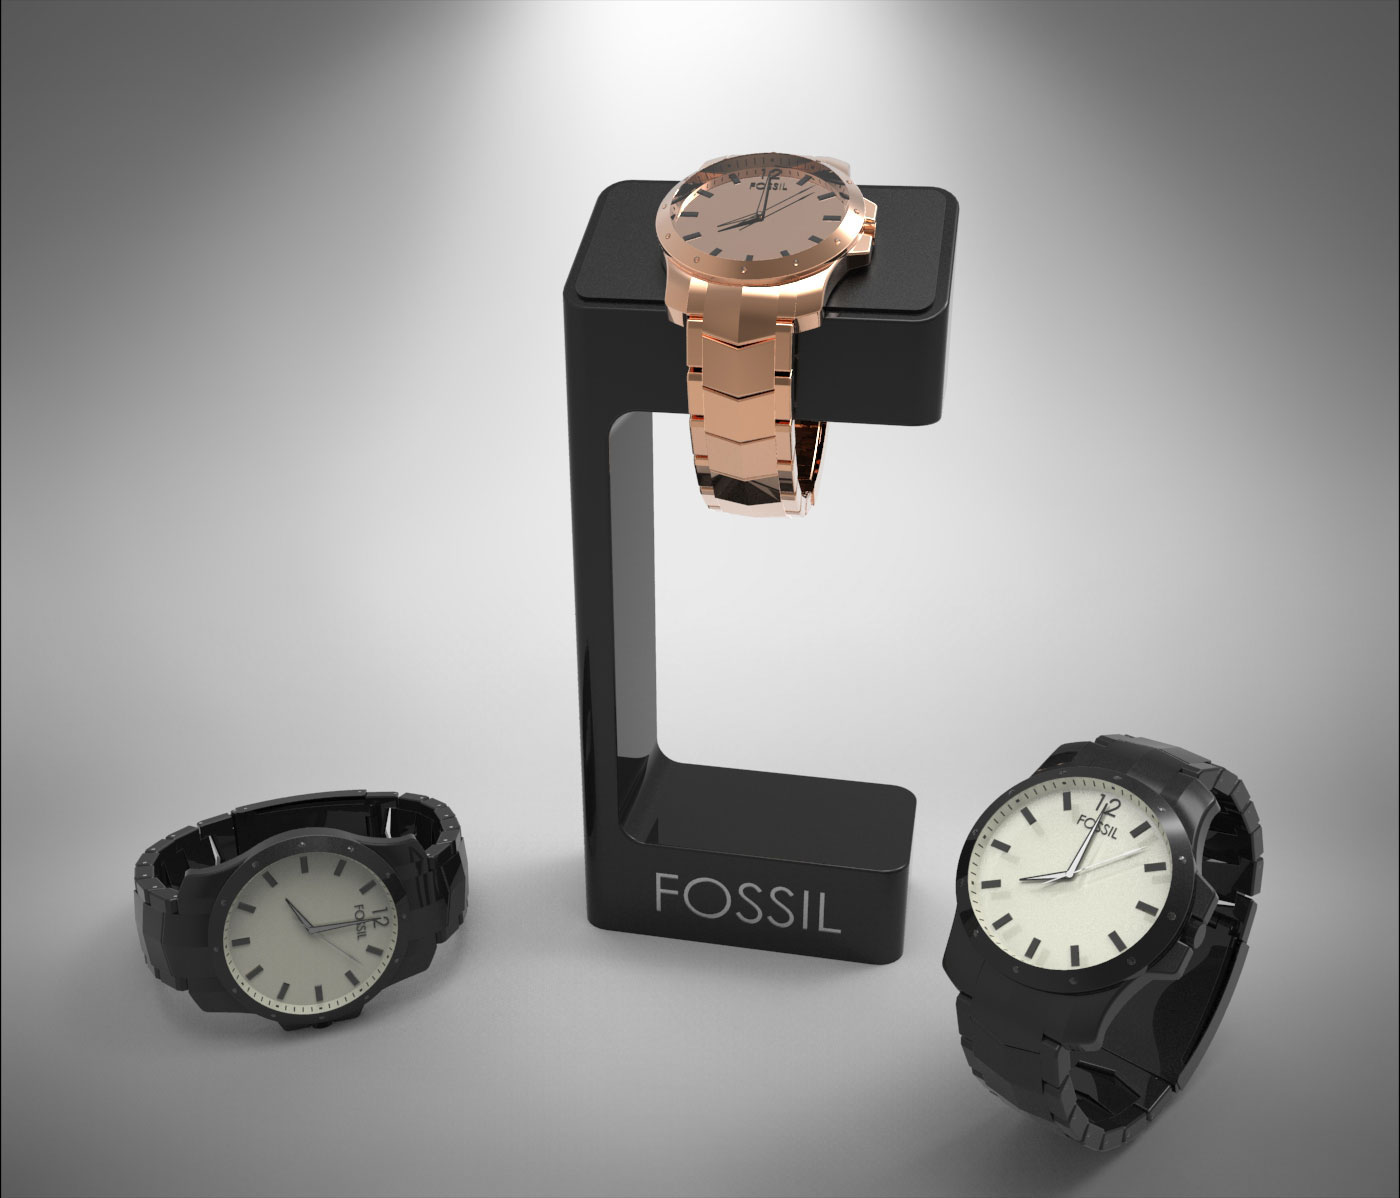 Fossil presentation Solidworks keyshot Render sw PS Layout watch 3D graphic concept engineered